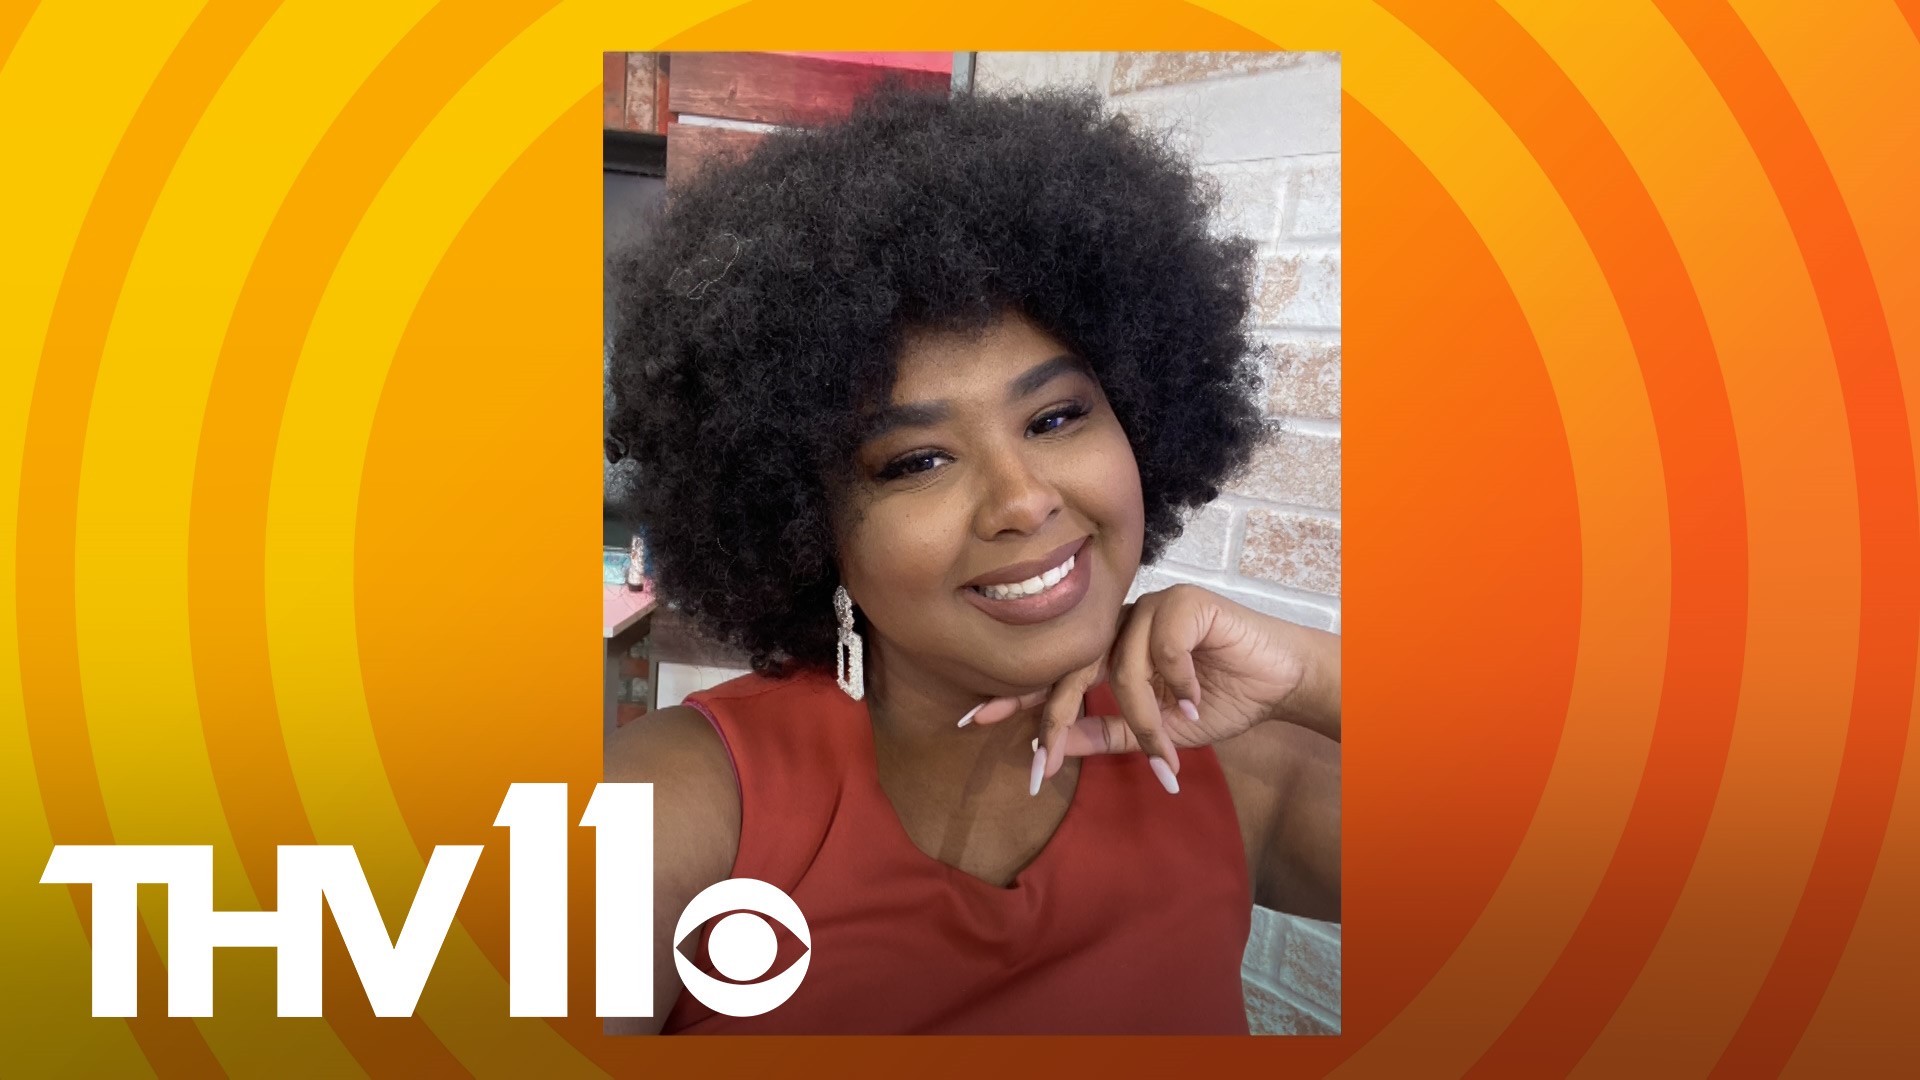 THV11 Meteorologist Corallys Ortiz talks about representing two communities of color and celebrating her hair in all its forms.